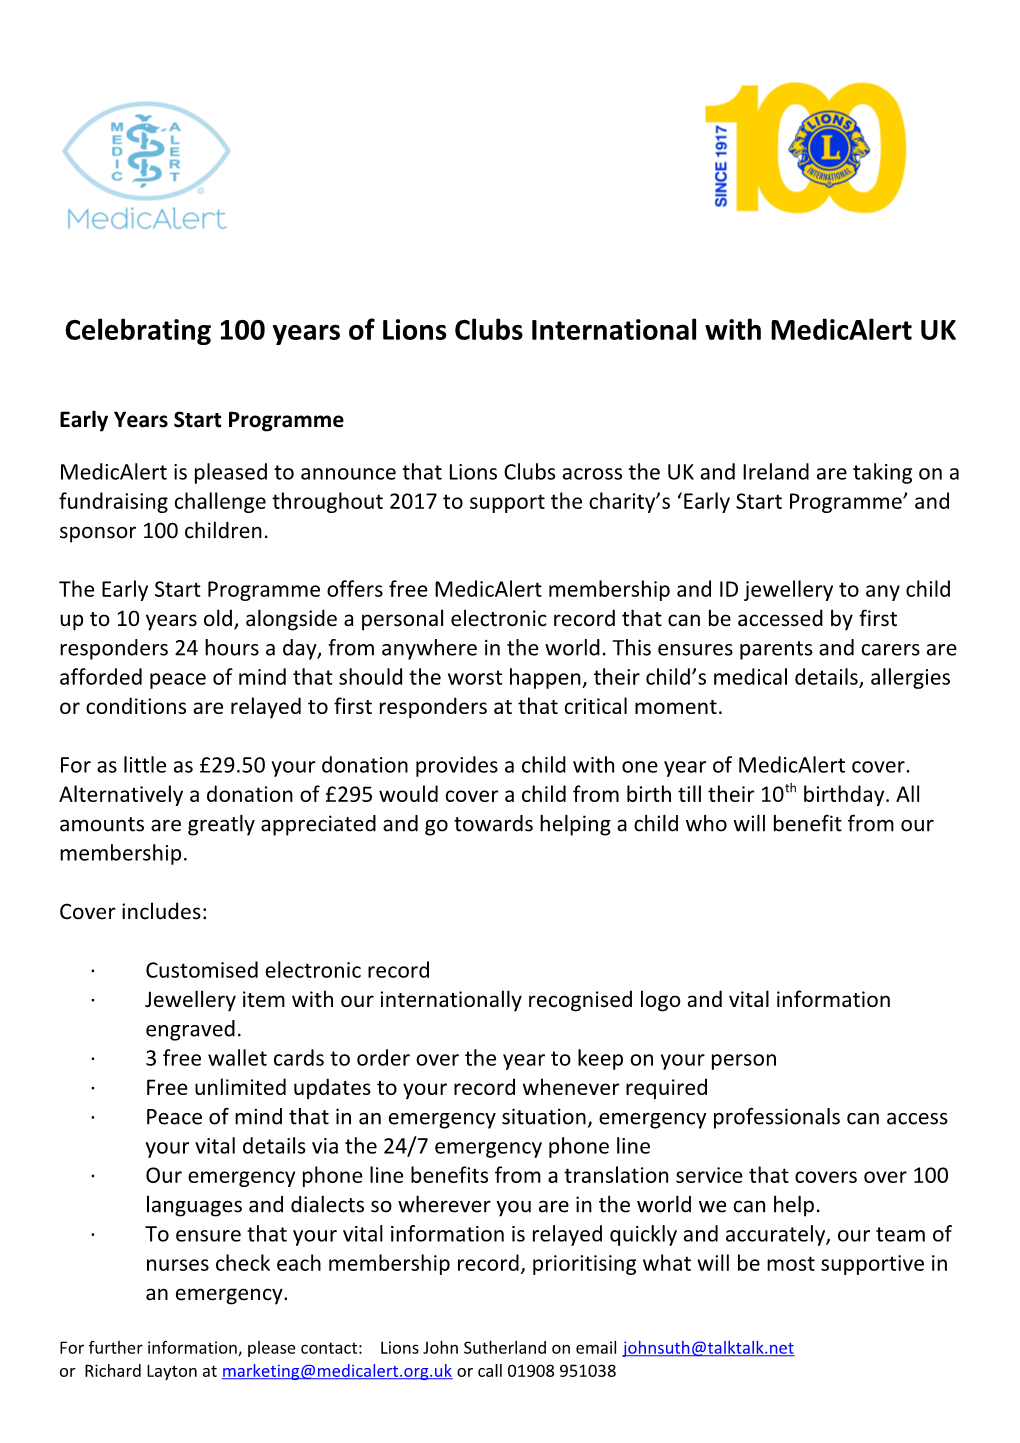 Celebrating 100 Years of Lions Clubs International with Medicalert UK